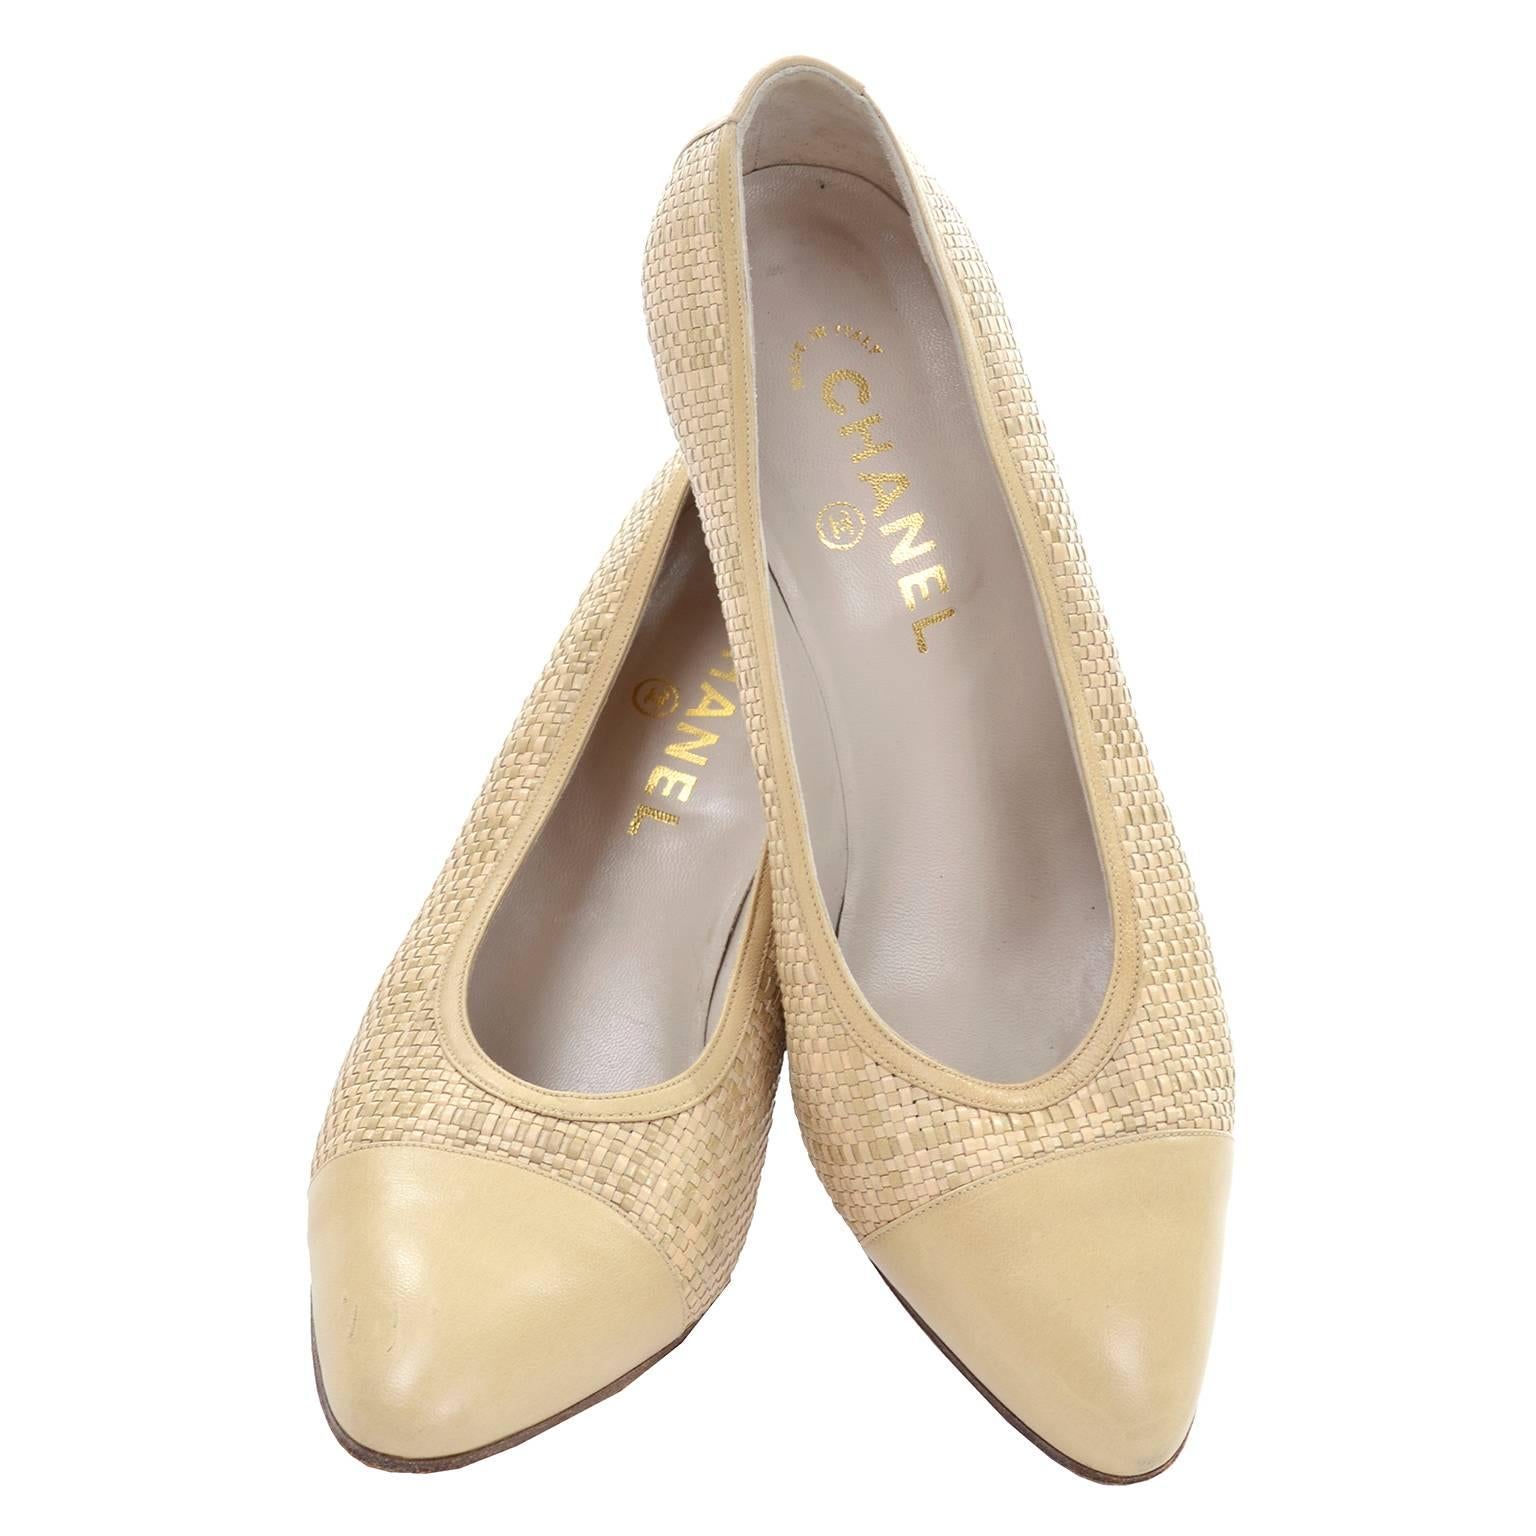 Chanel Vintage Pumps Woven Shoes with Tan Leather Trim in Size 8.5